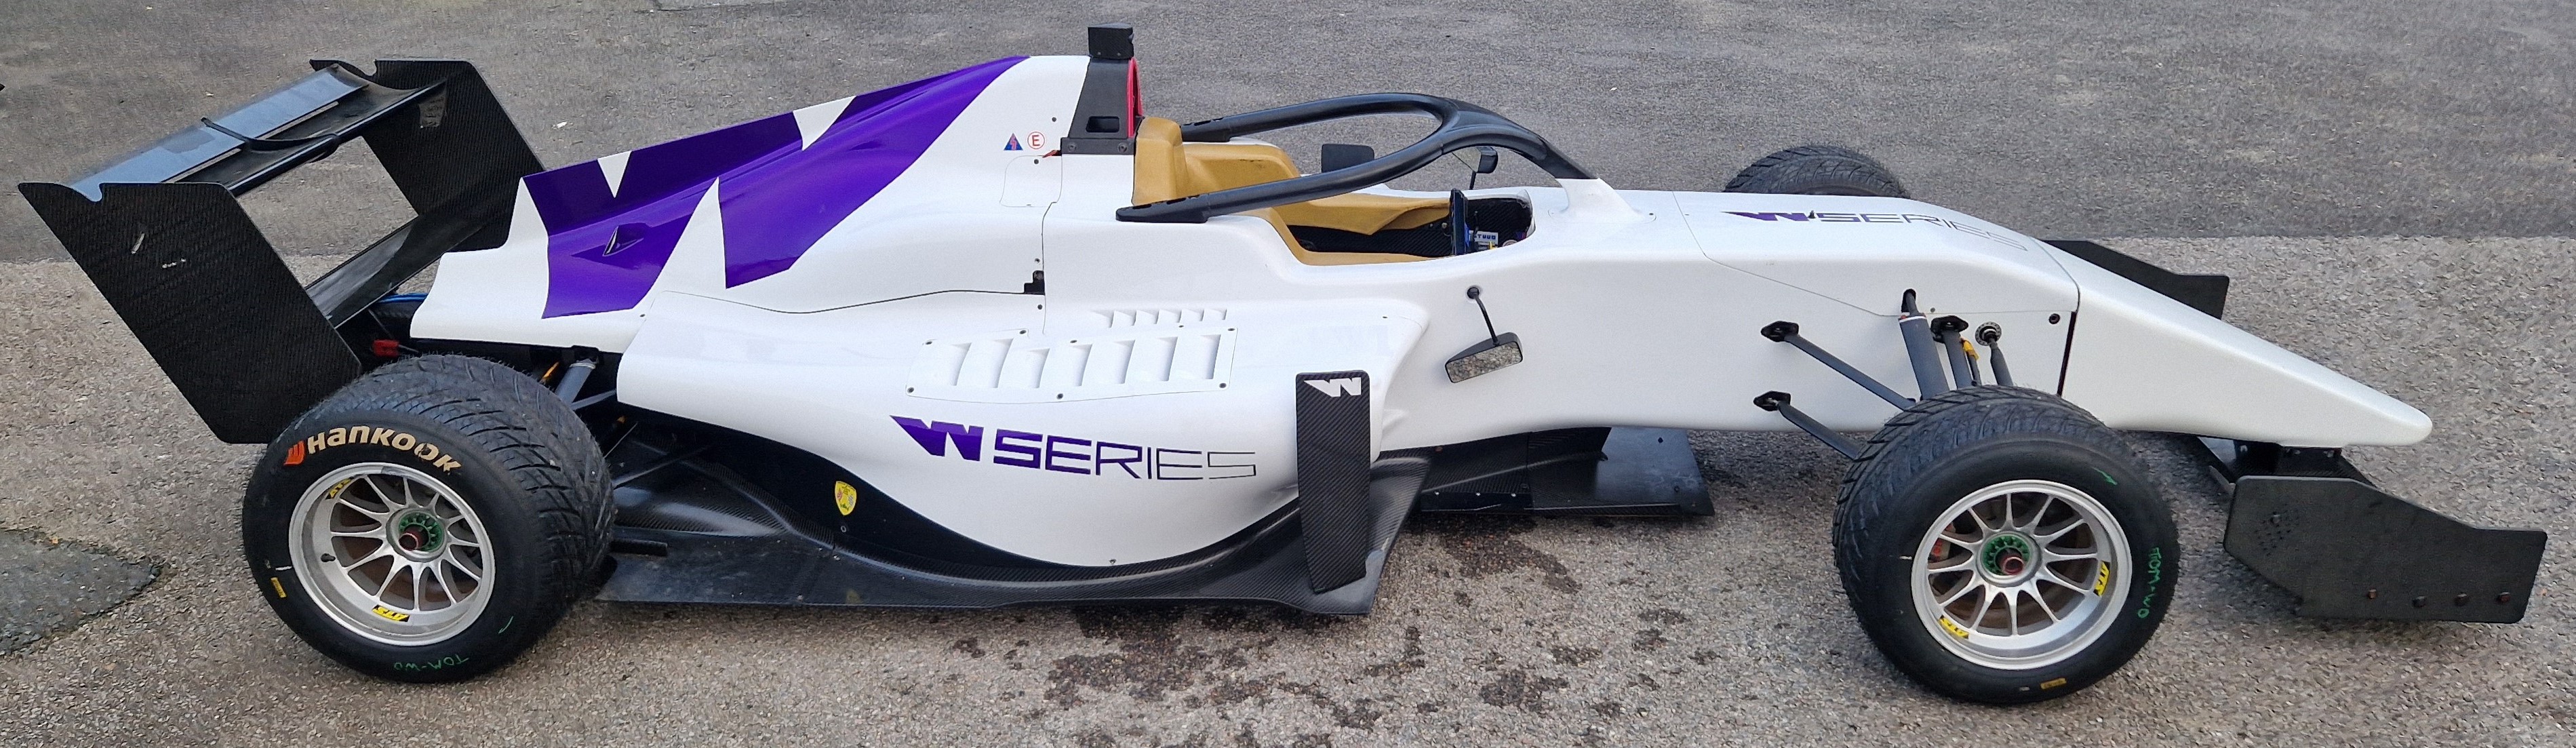 One TATUUS F3 T-318 Alfa Romeo Race Car Chassis No. 034 (2019) Finished in W Series Spare Car Livery - Image 2 of 10